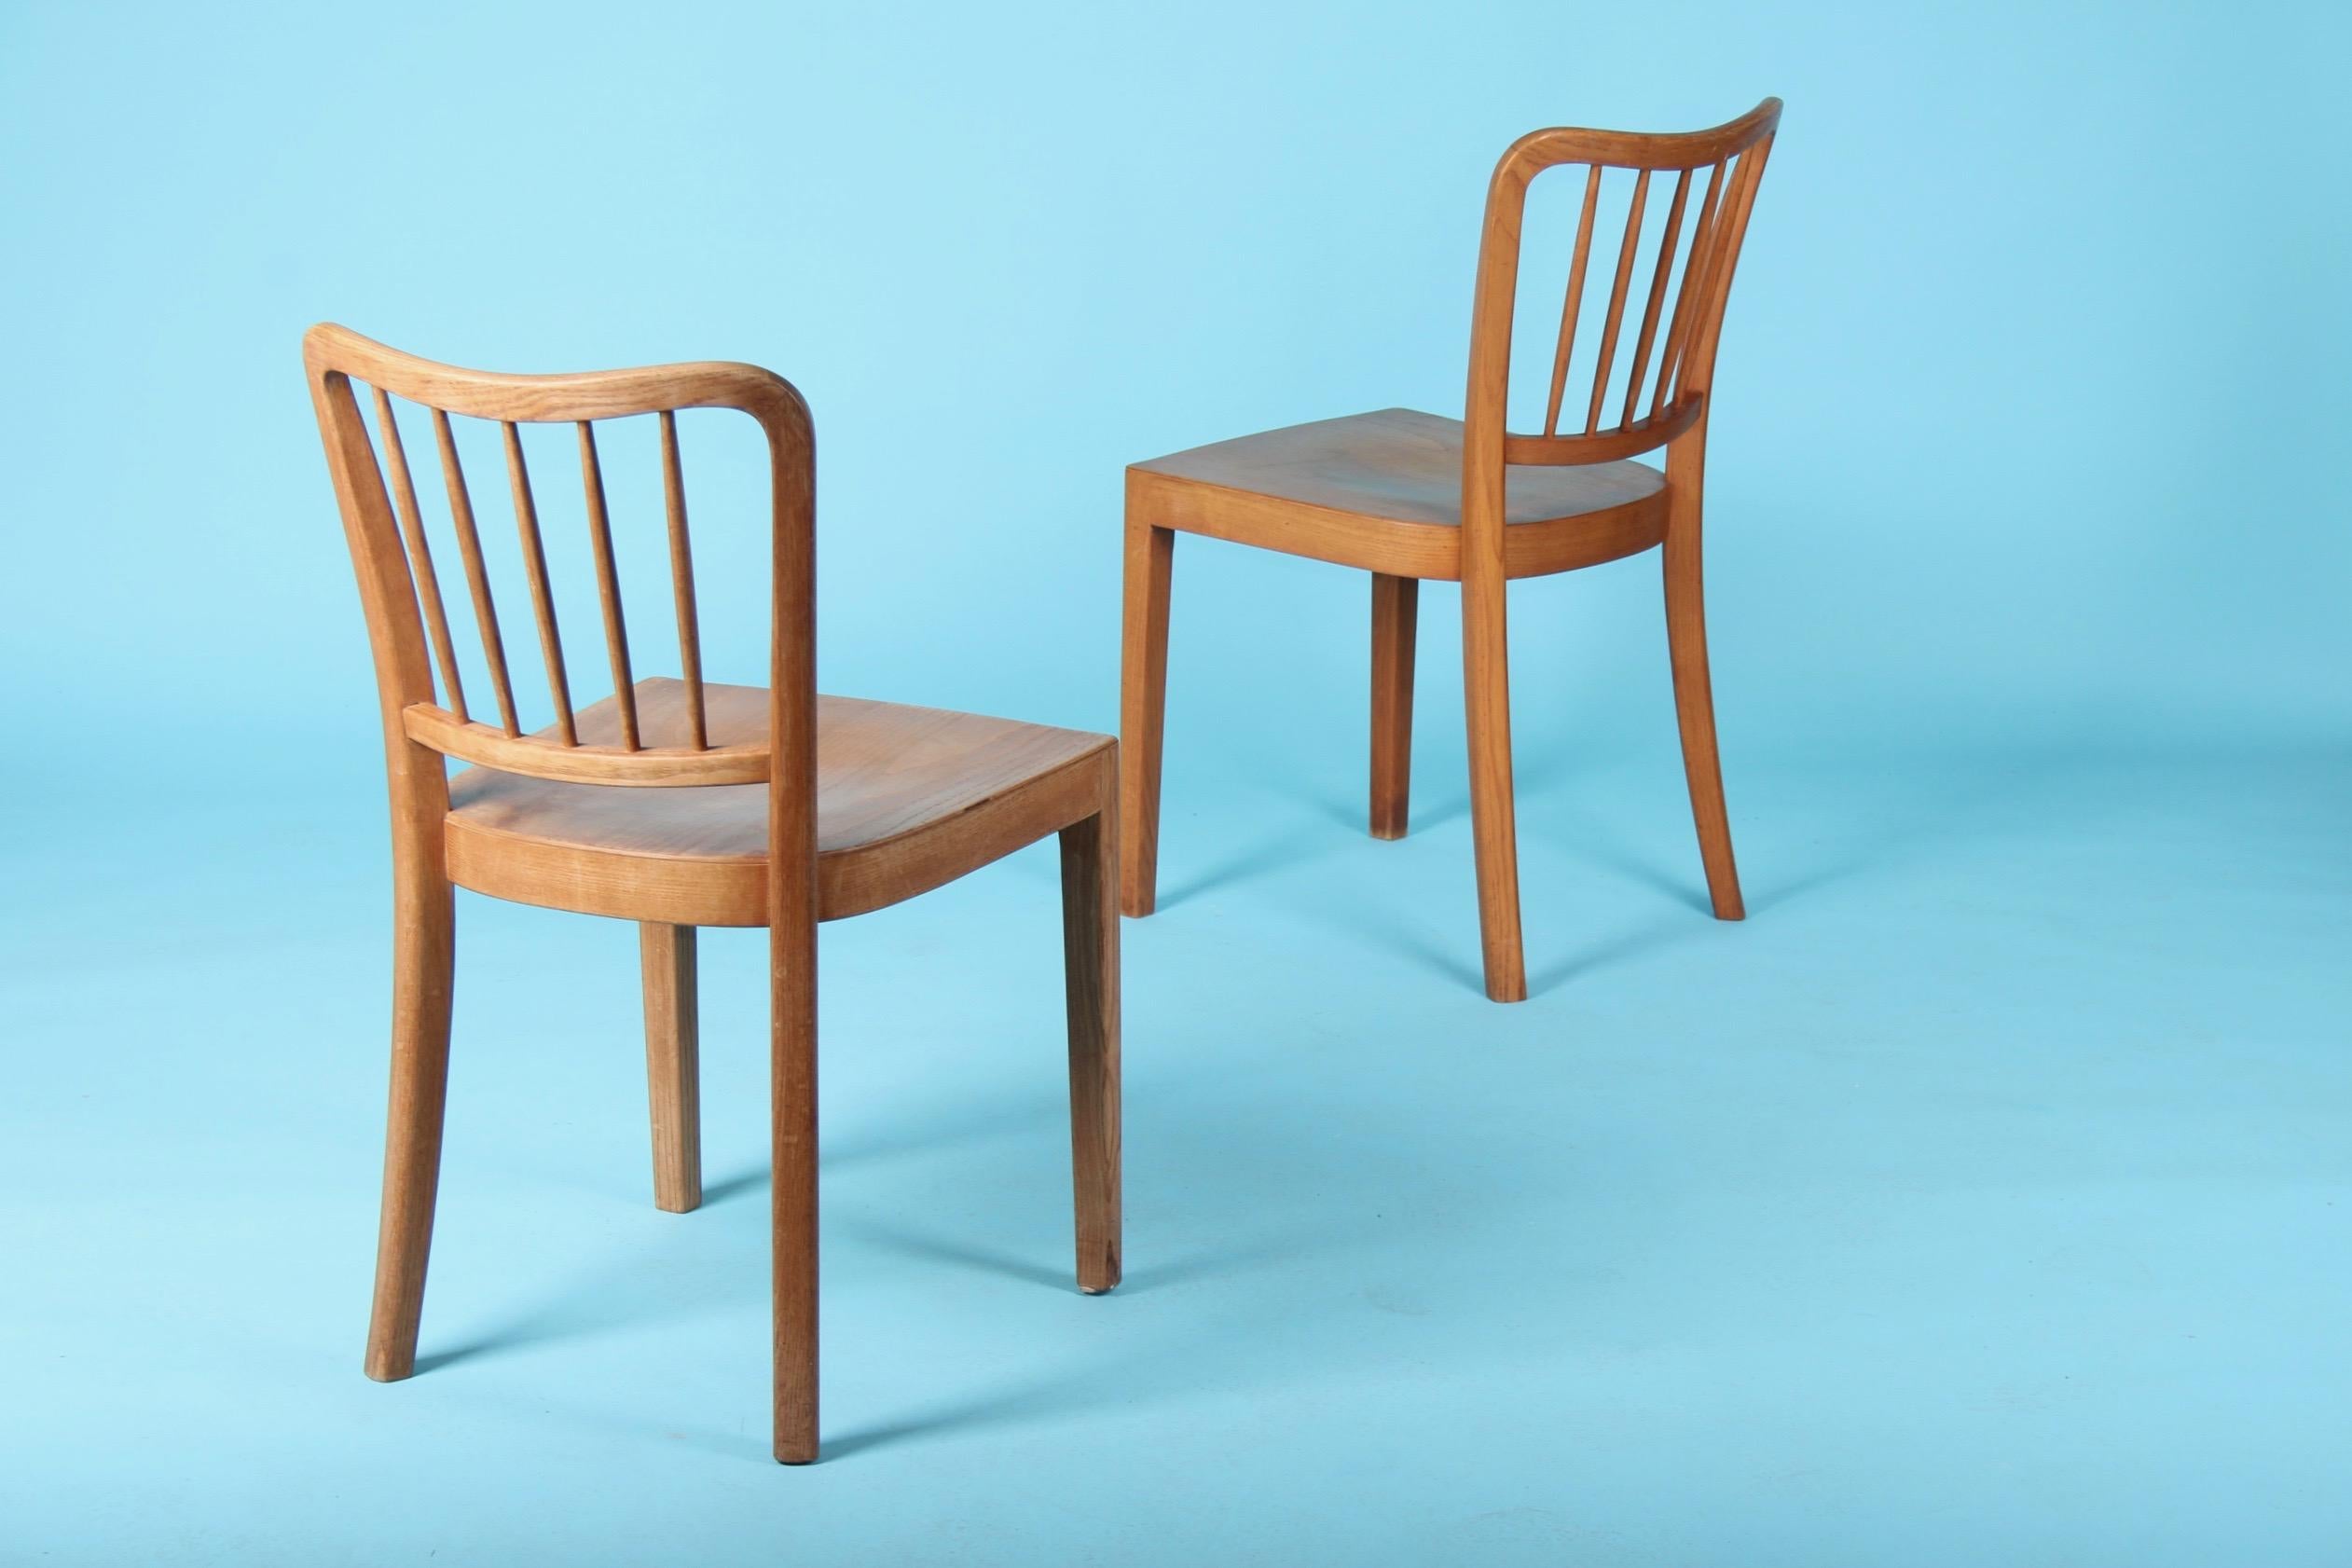 Mid-20th Century Pair of Organic Wood Chairs